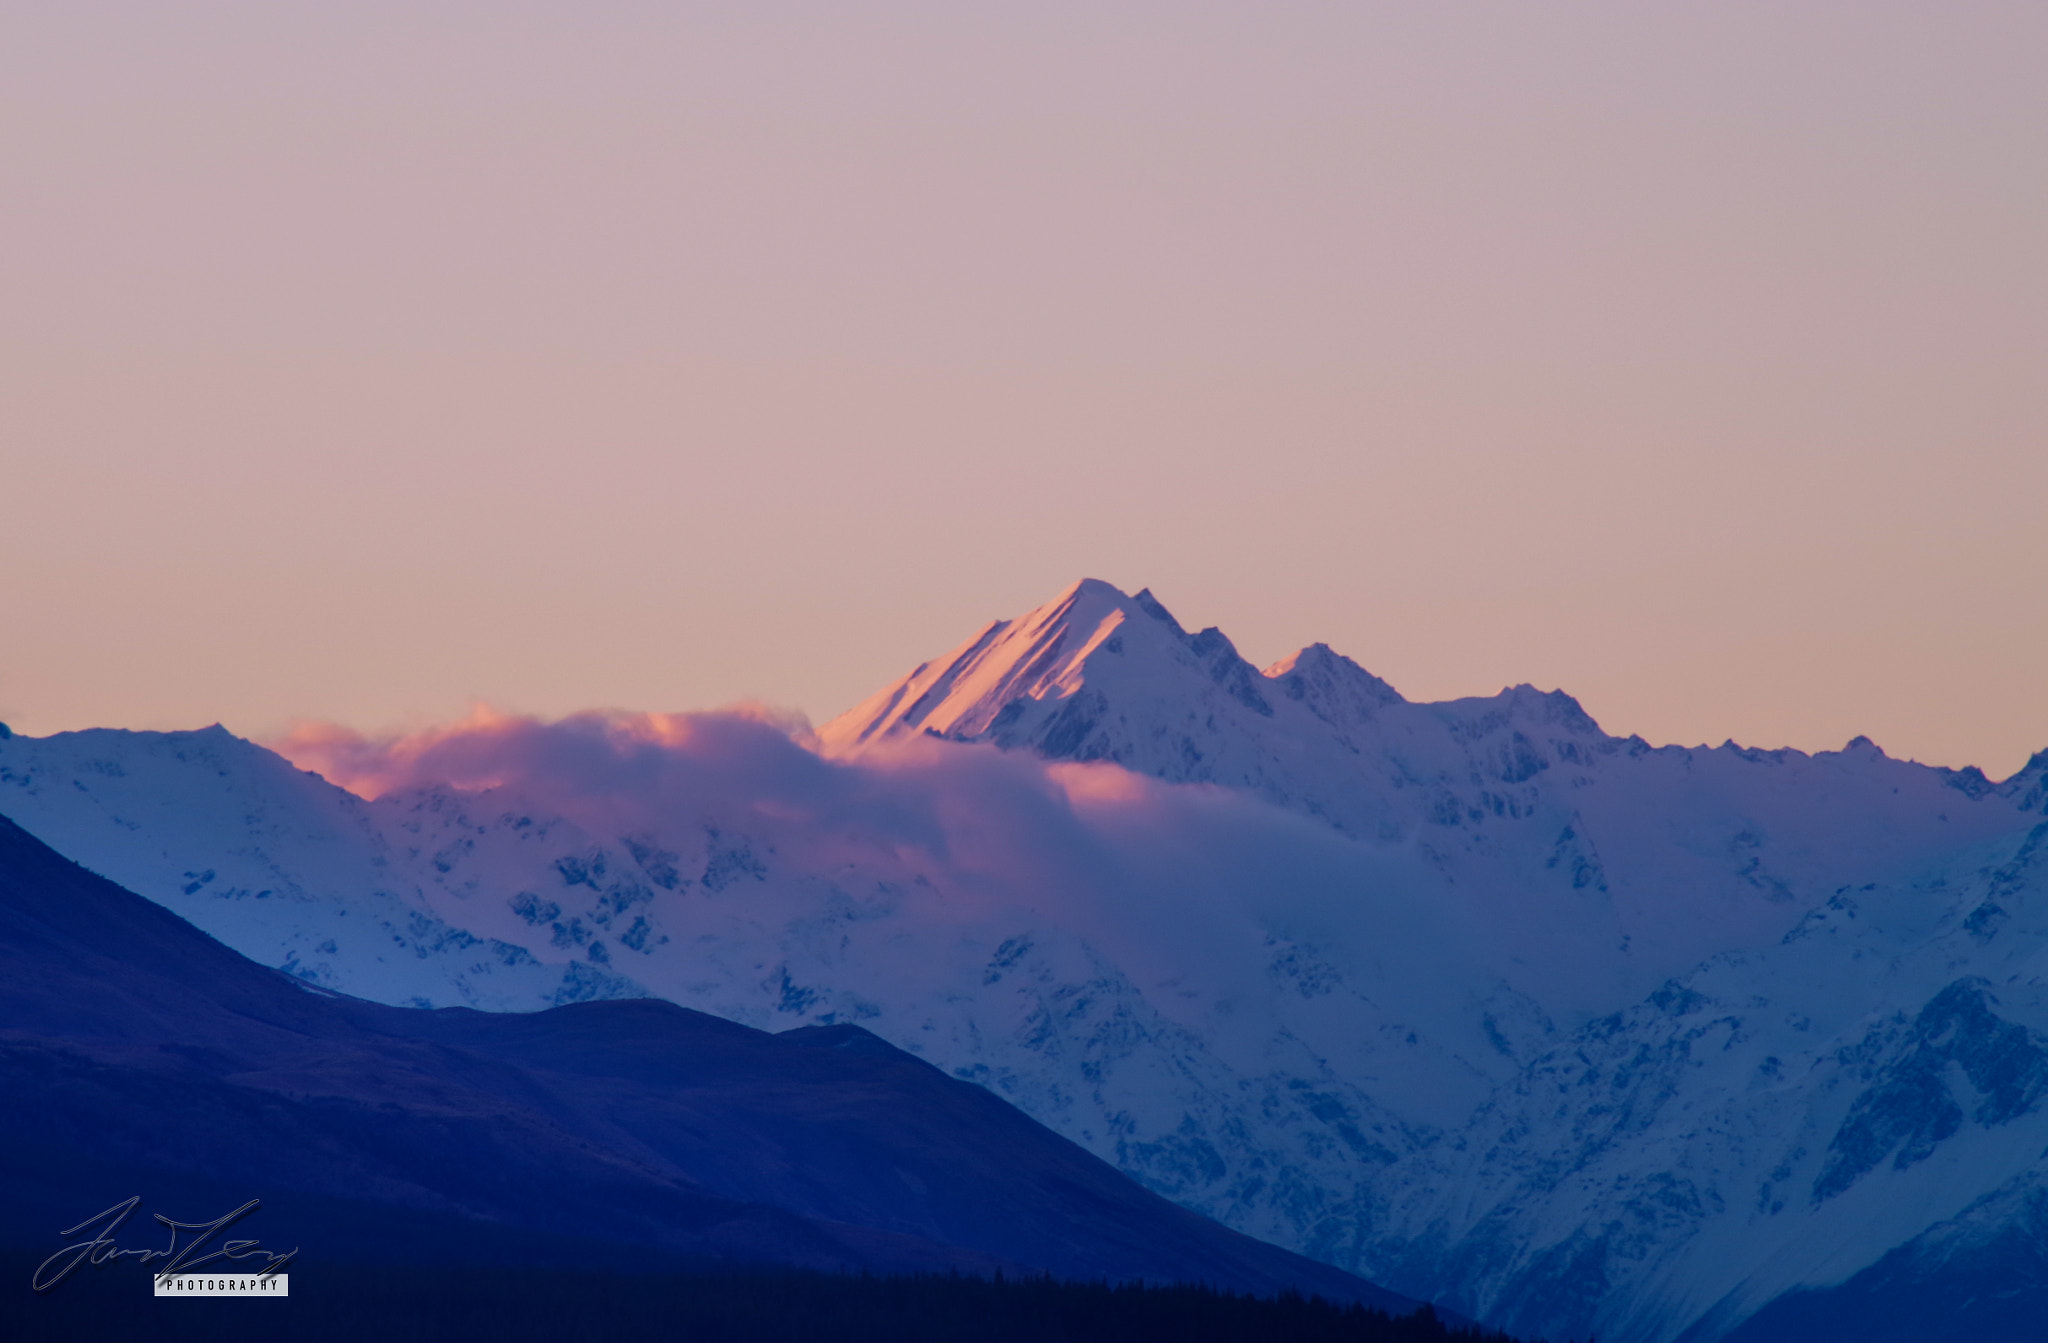 Pentax K-50 sample photo. Mount cook in winter photography